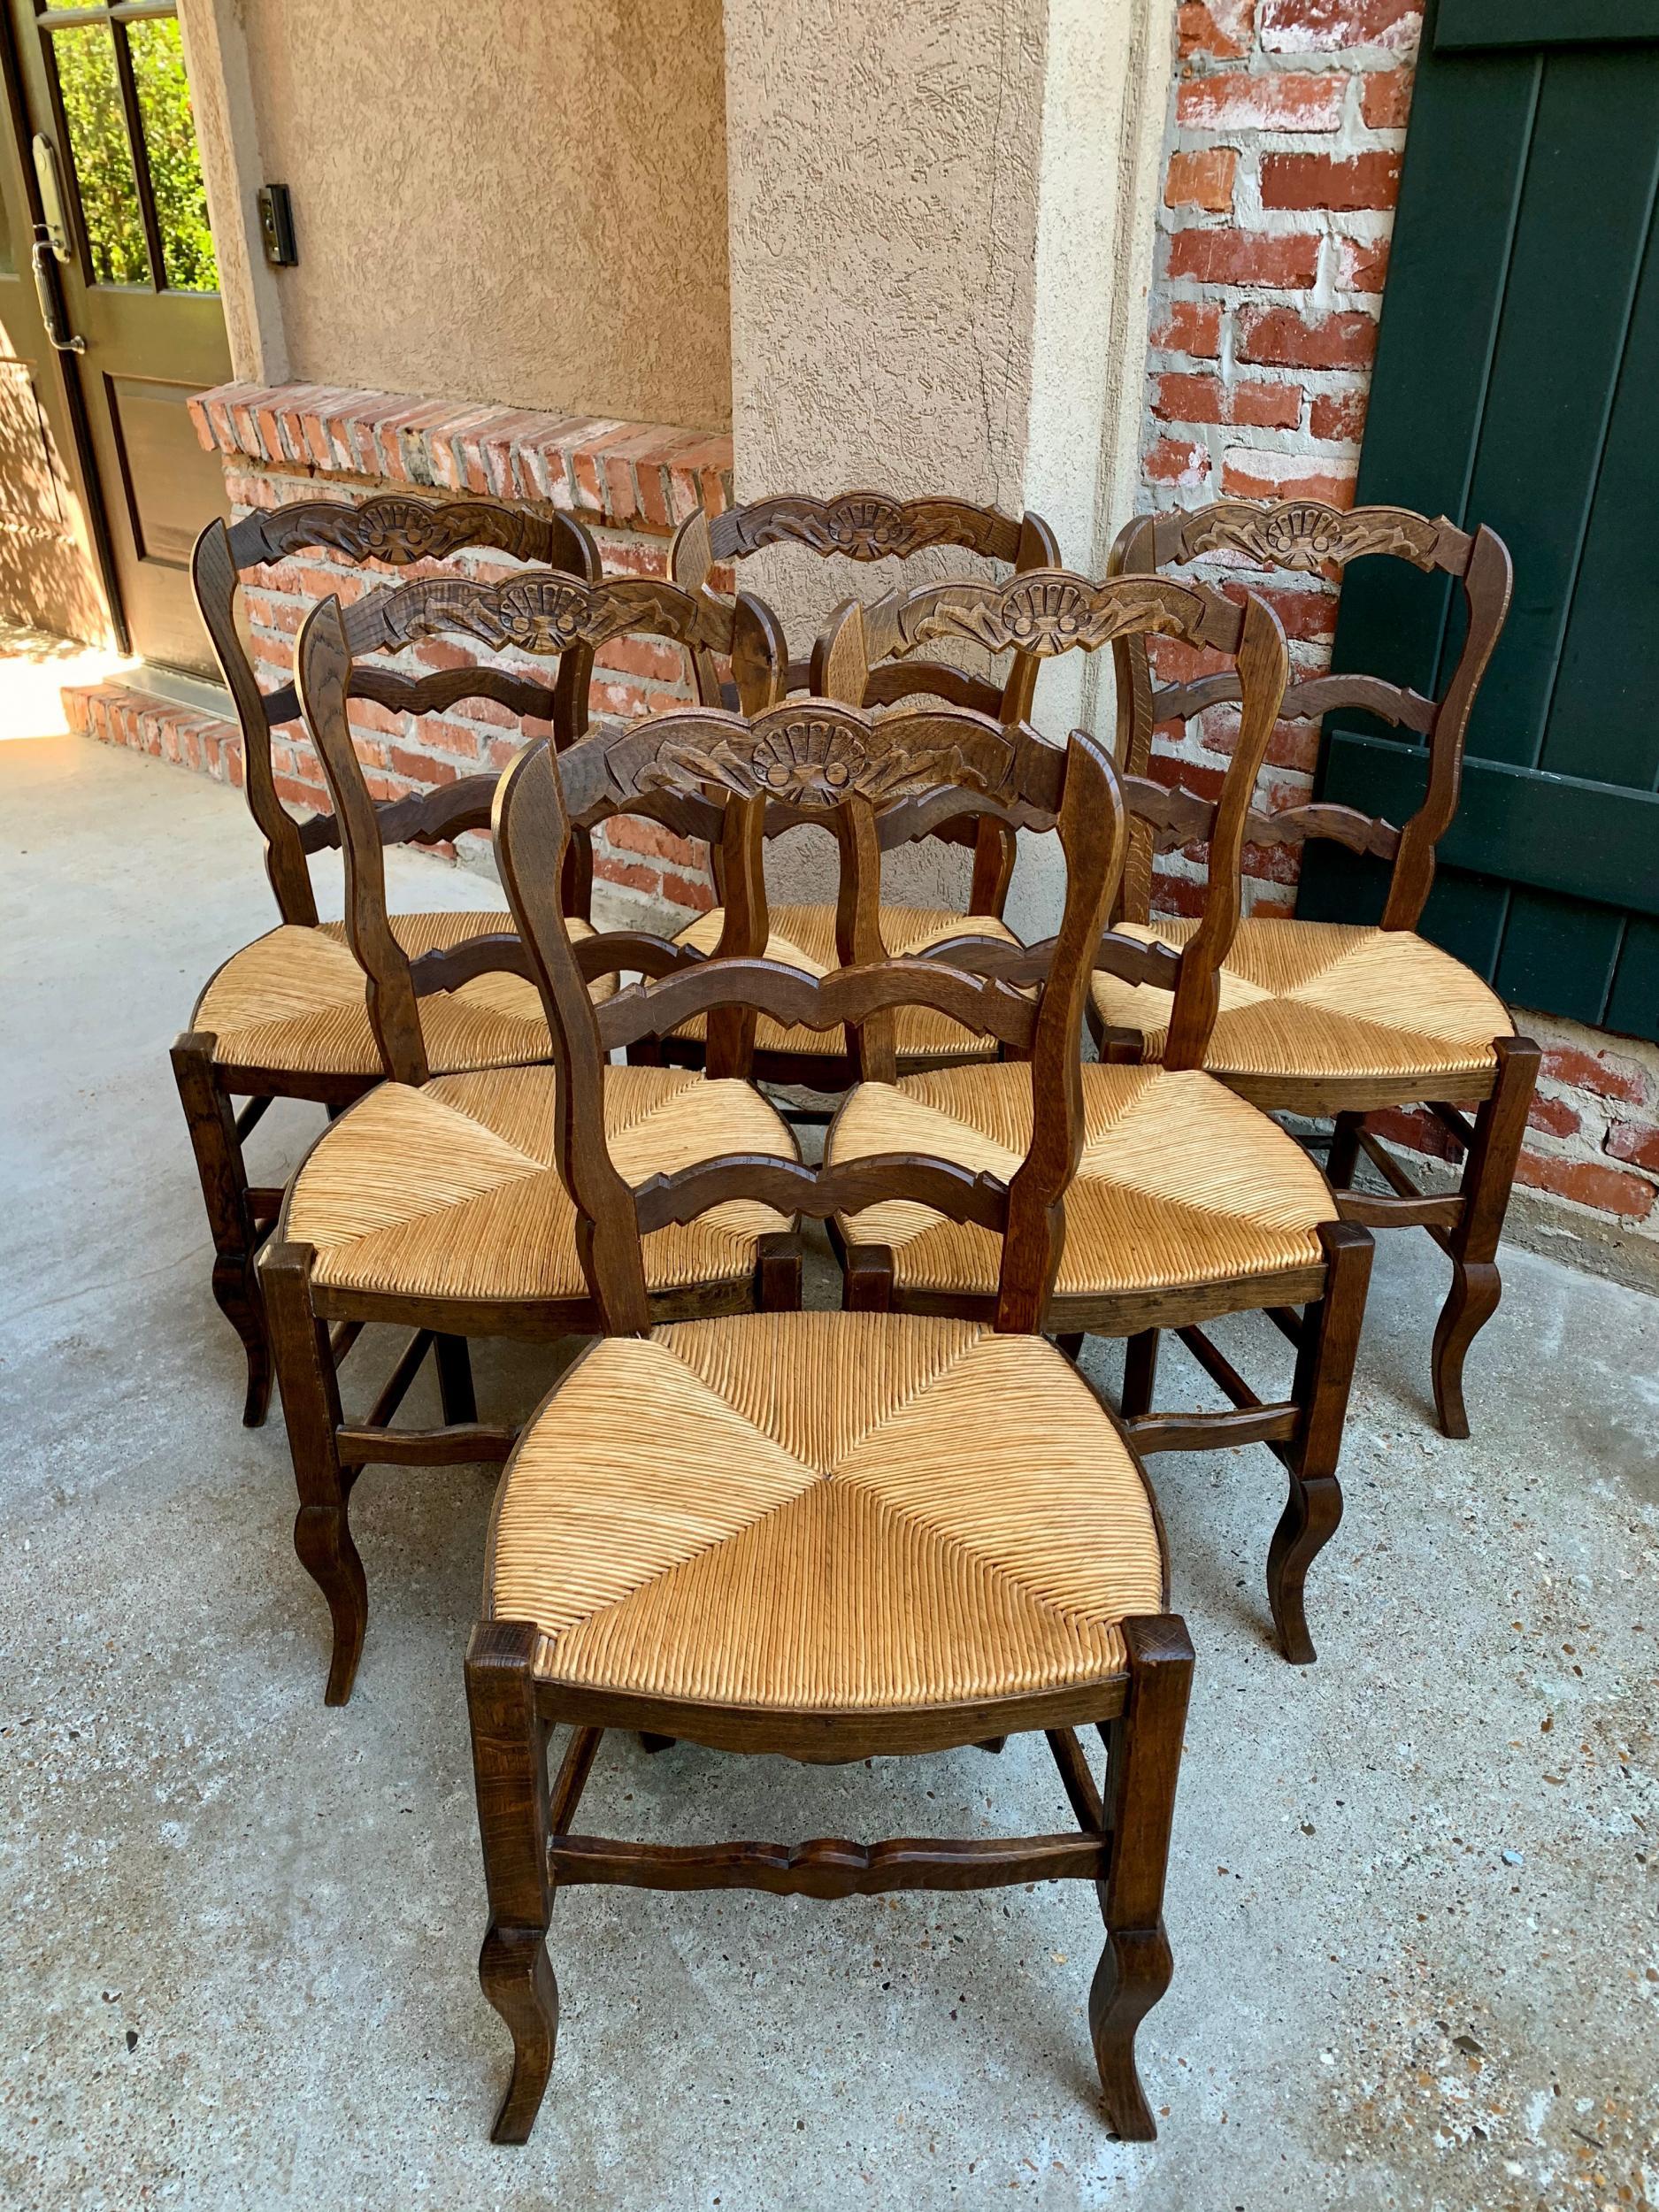 ~Direct from France~
~Lovely set of 6 antique French chairs, with Classic French style… perfect for a kitchen or dining room with their original finish that compliments any decor!~
~Serpentine ladder backs with a pretty Silhouette; rail has a